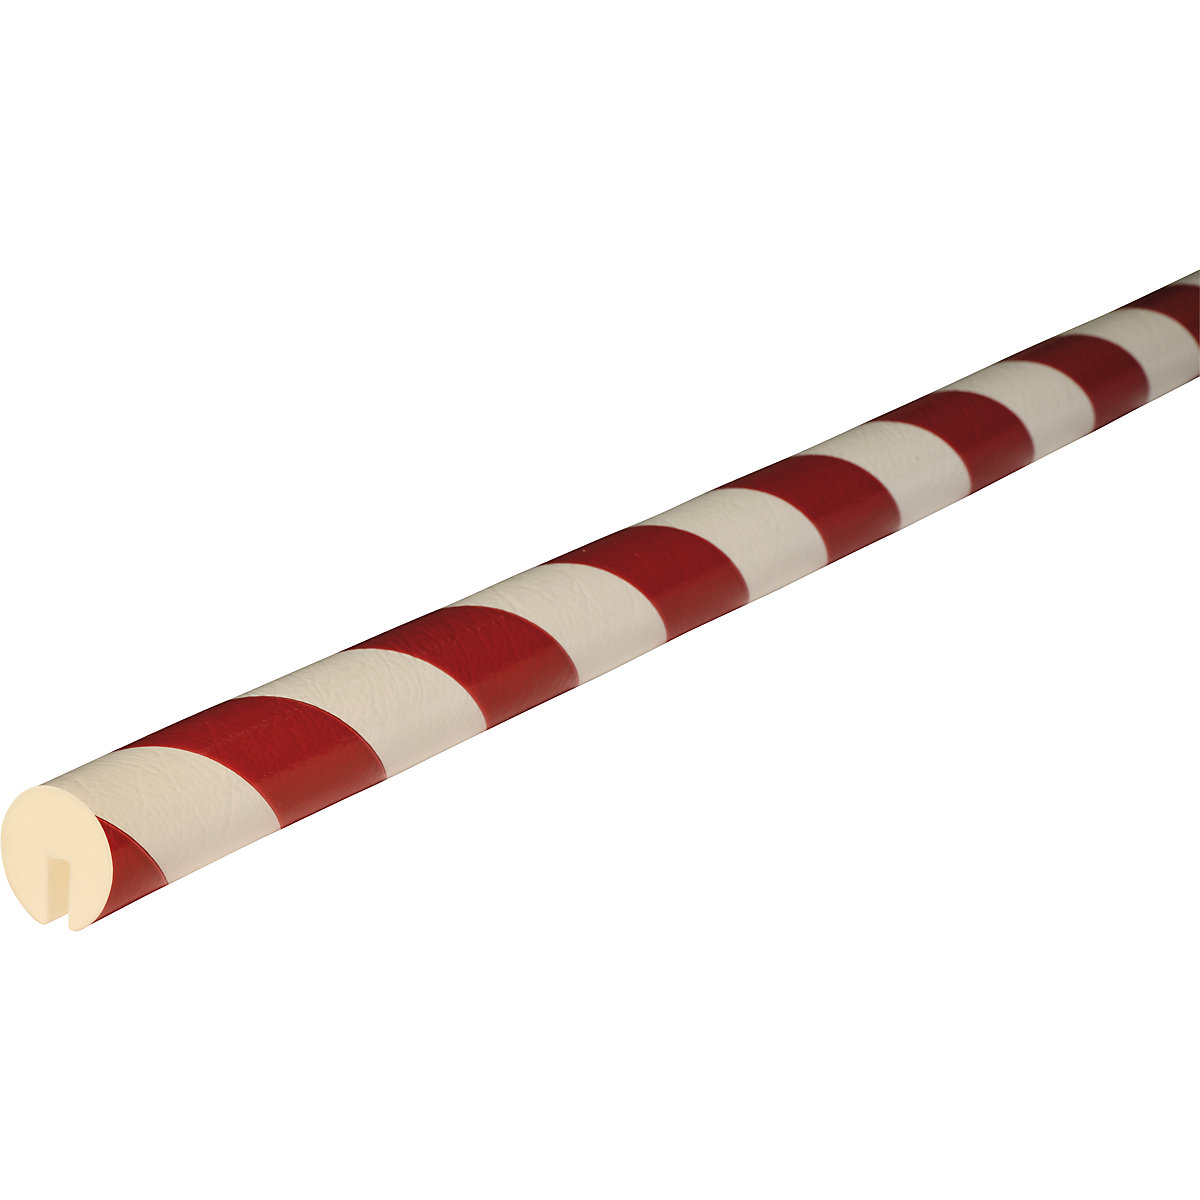 Knuffi® edge protection – SHG, type B, 1 x 50 m roll, red / white-20